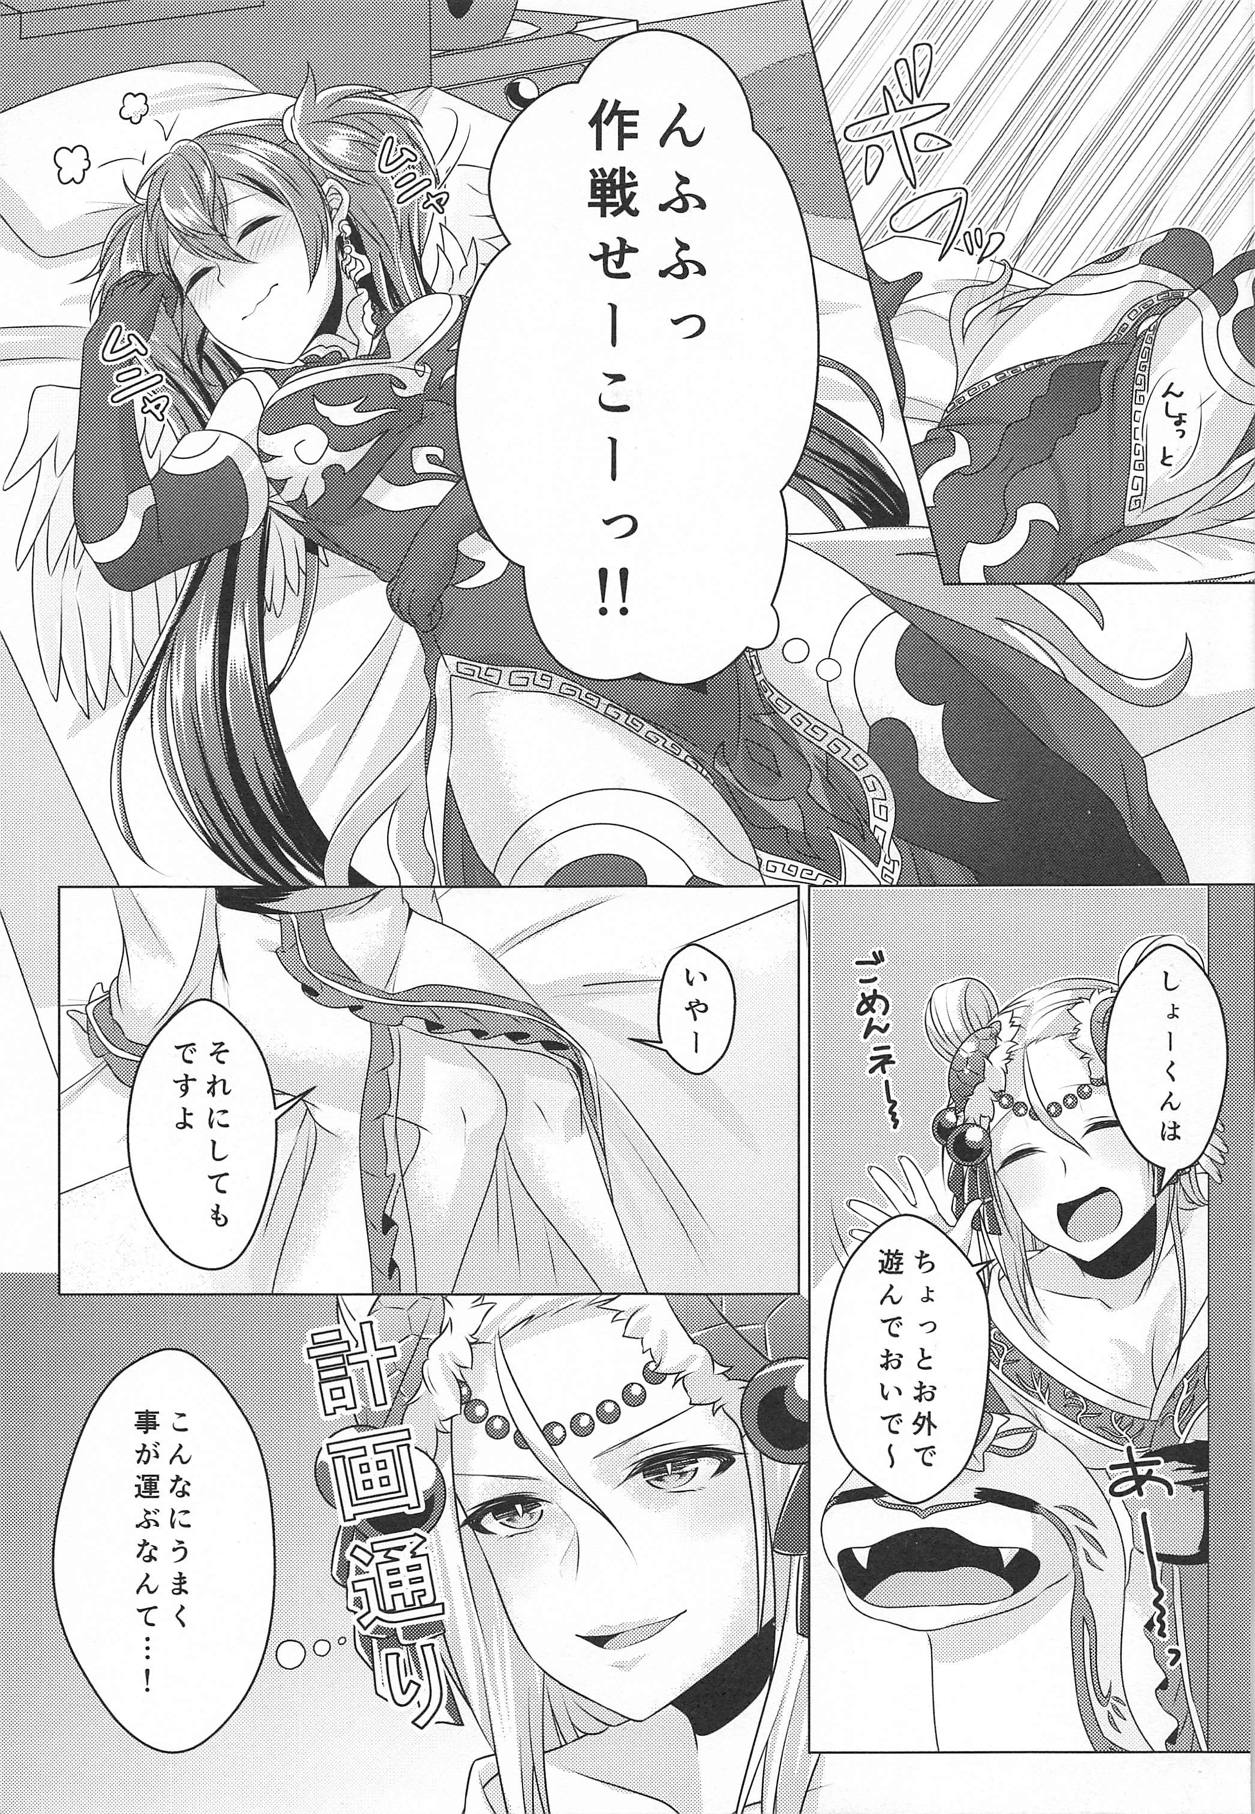 (C92) [YZ+ (Yuzuto Sen)] Reikan Tentacle 2 and M (Puzzle & Dragons) page 8 full